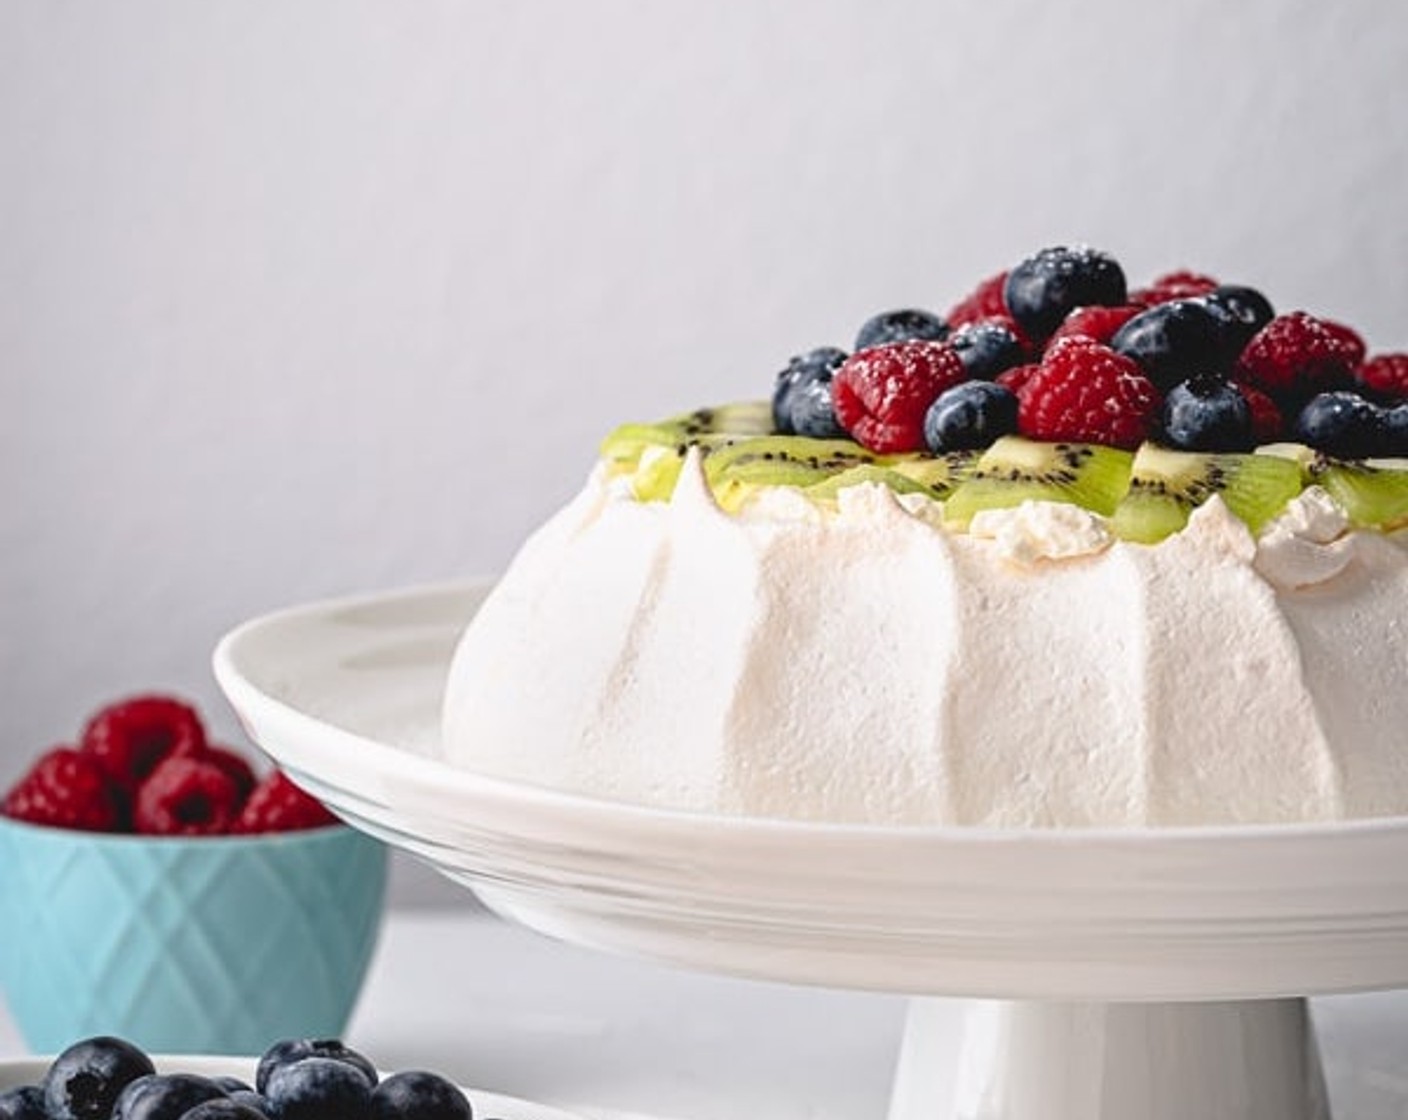 step 12 When you are ready to serve, top the pavlova with whipped cream frosting and Fresh Fruits (to taste) your choice.